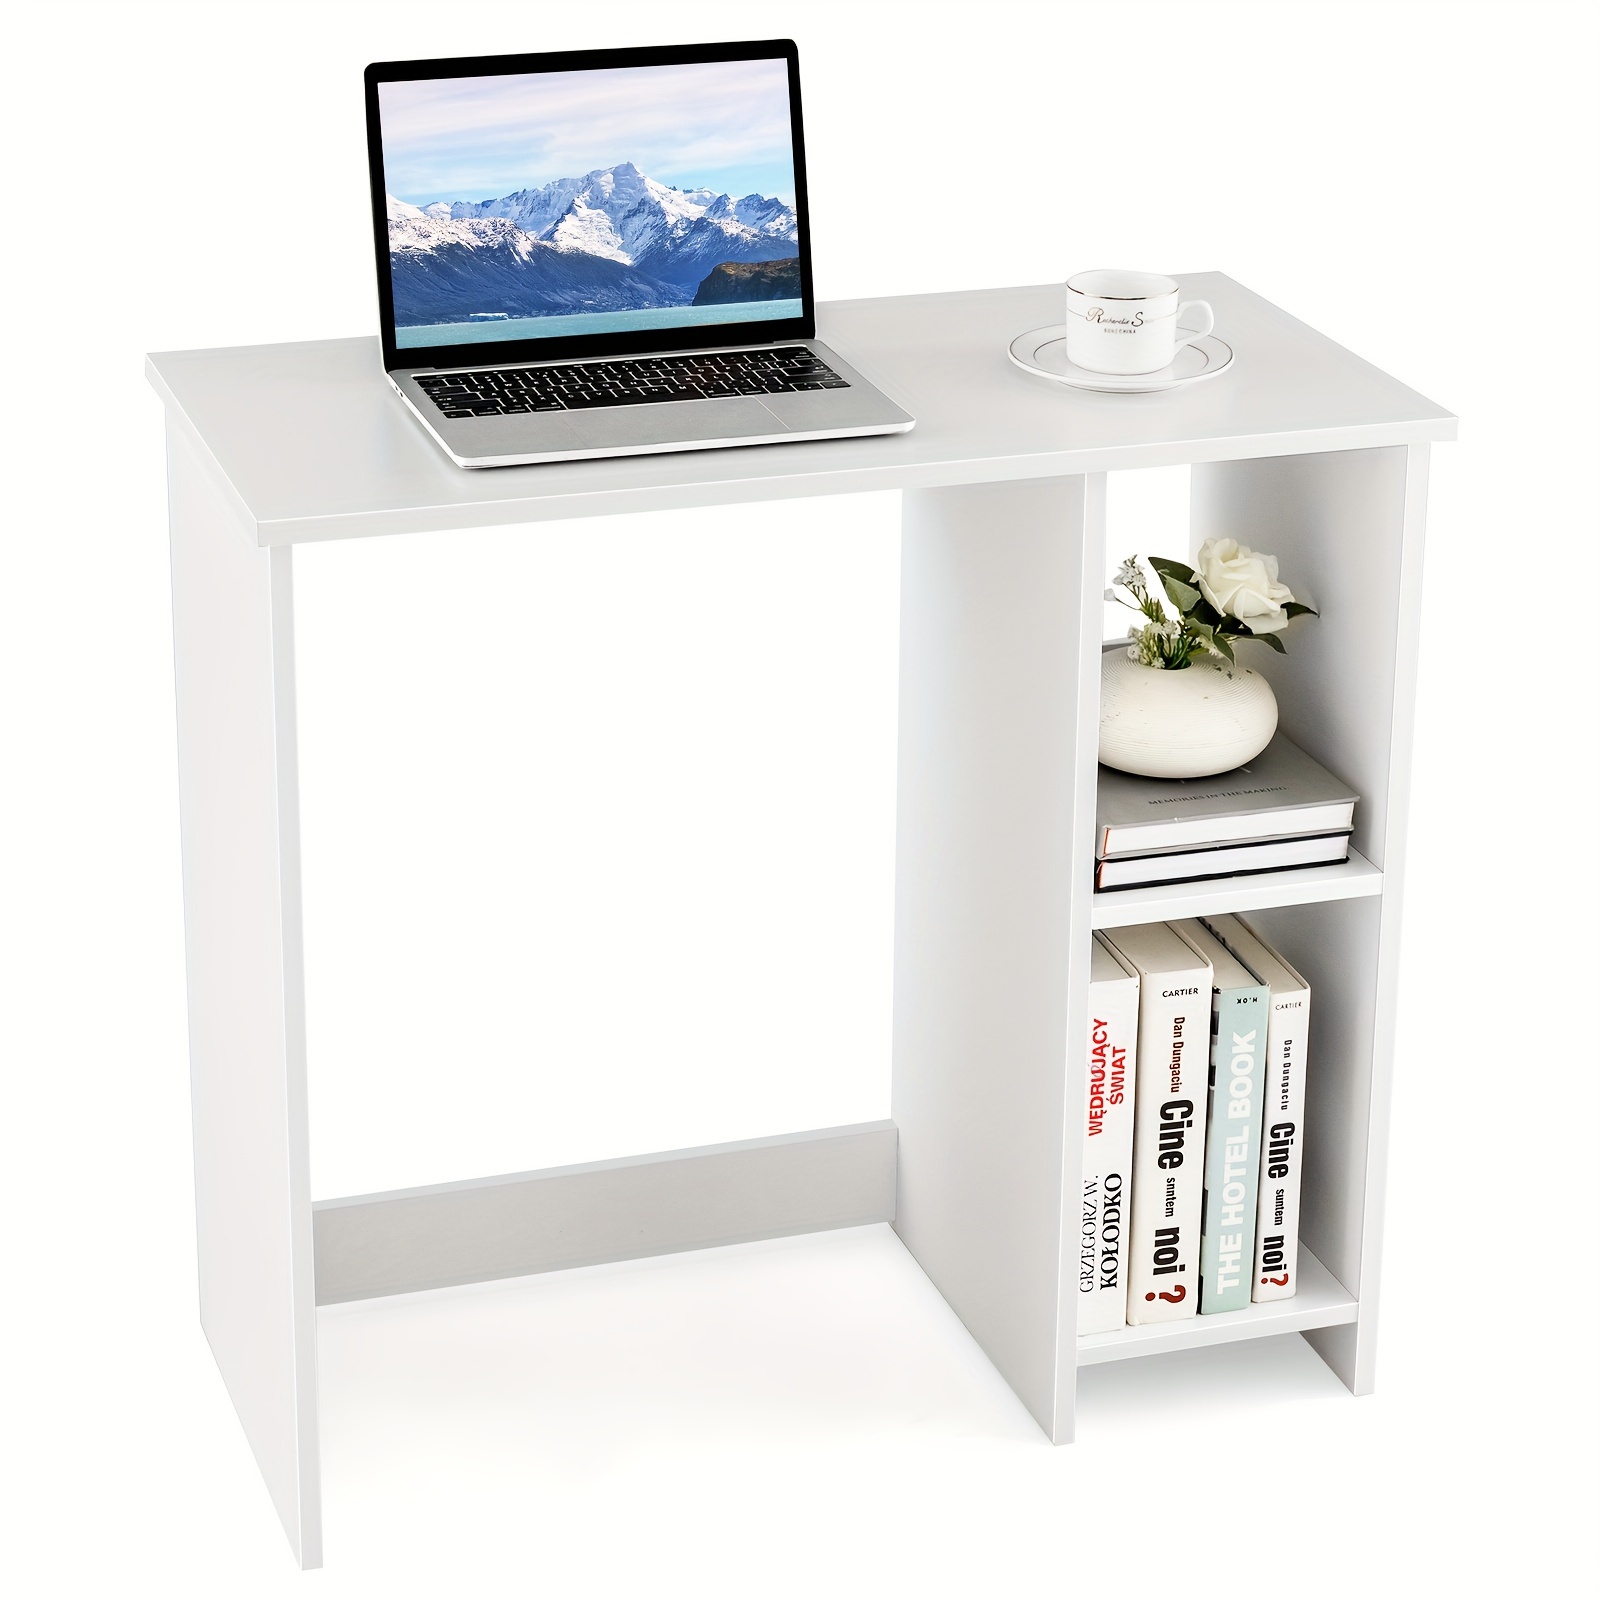 

1pc Modern Wooden Small Computer Desk 31.5" With 2 Storage Compartments, Home Office Study Writing Table, Compact Design For Space-saving, Easy Assembly